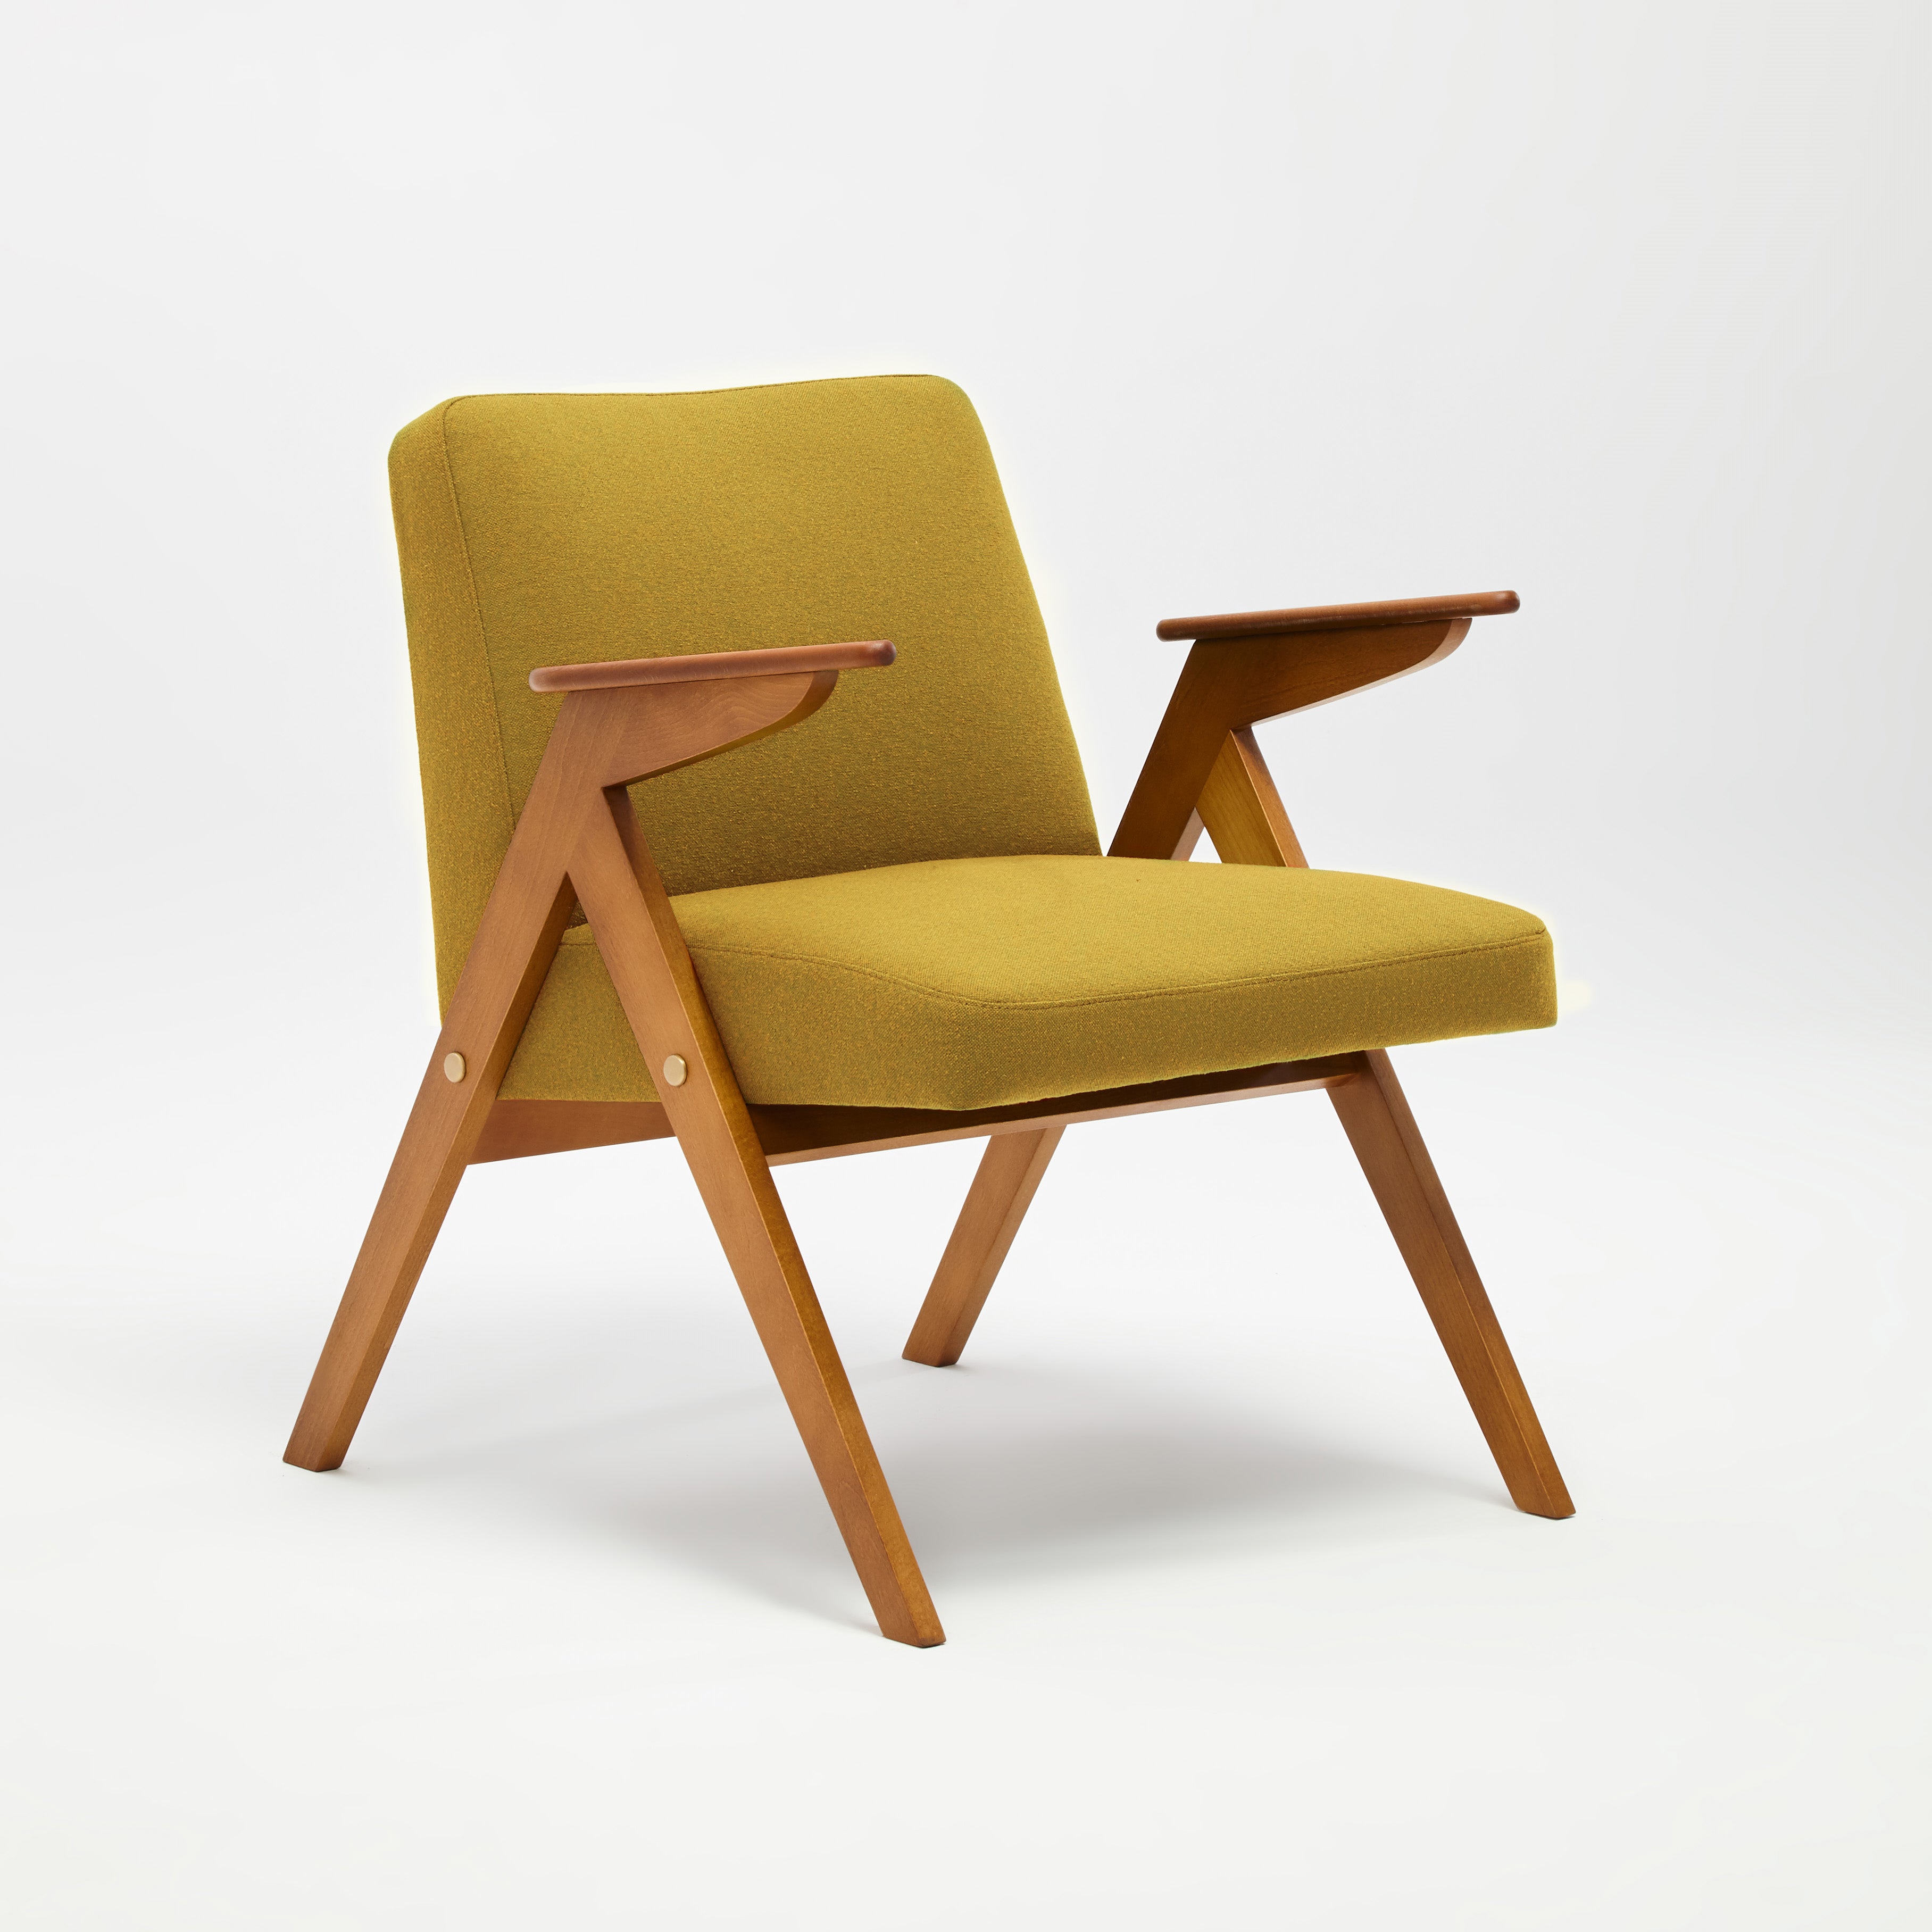 JUNCO Chair beech wood upholstery colour mustard white background